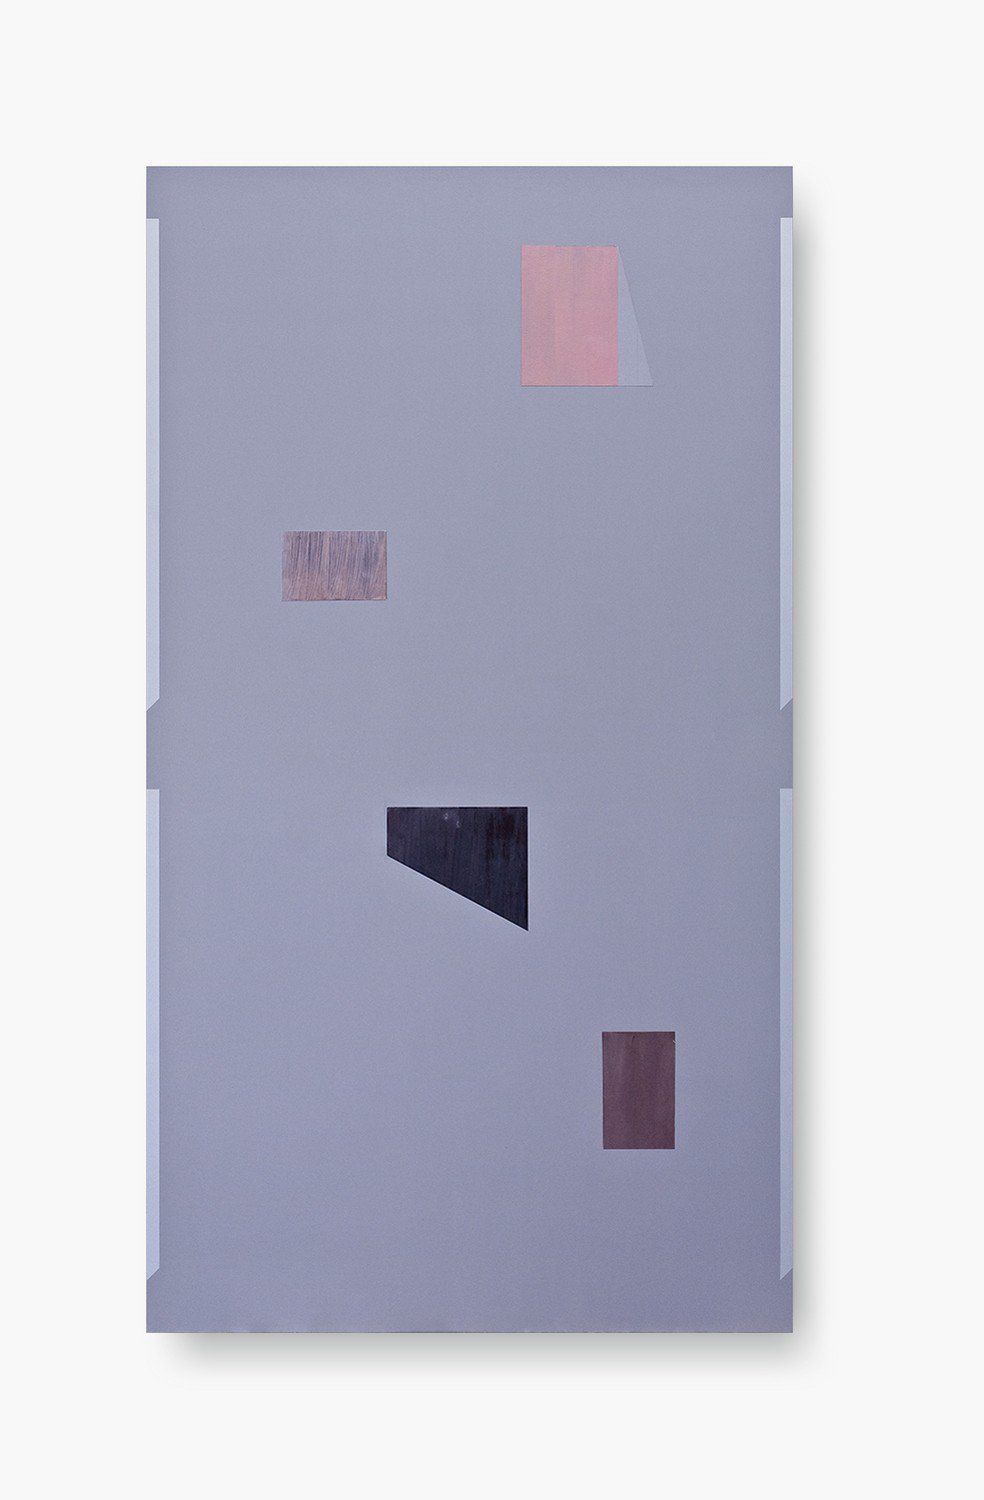 Nick OberthalerUntitled (fading evidence), 2013Primer, acrylics and colored papers on alucopan180 x 100 cm